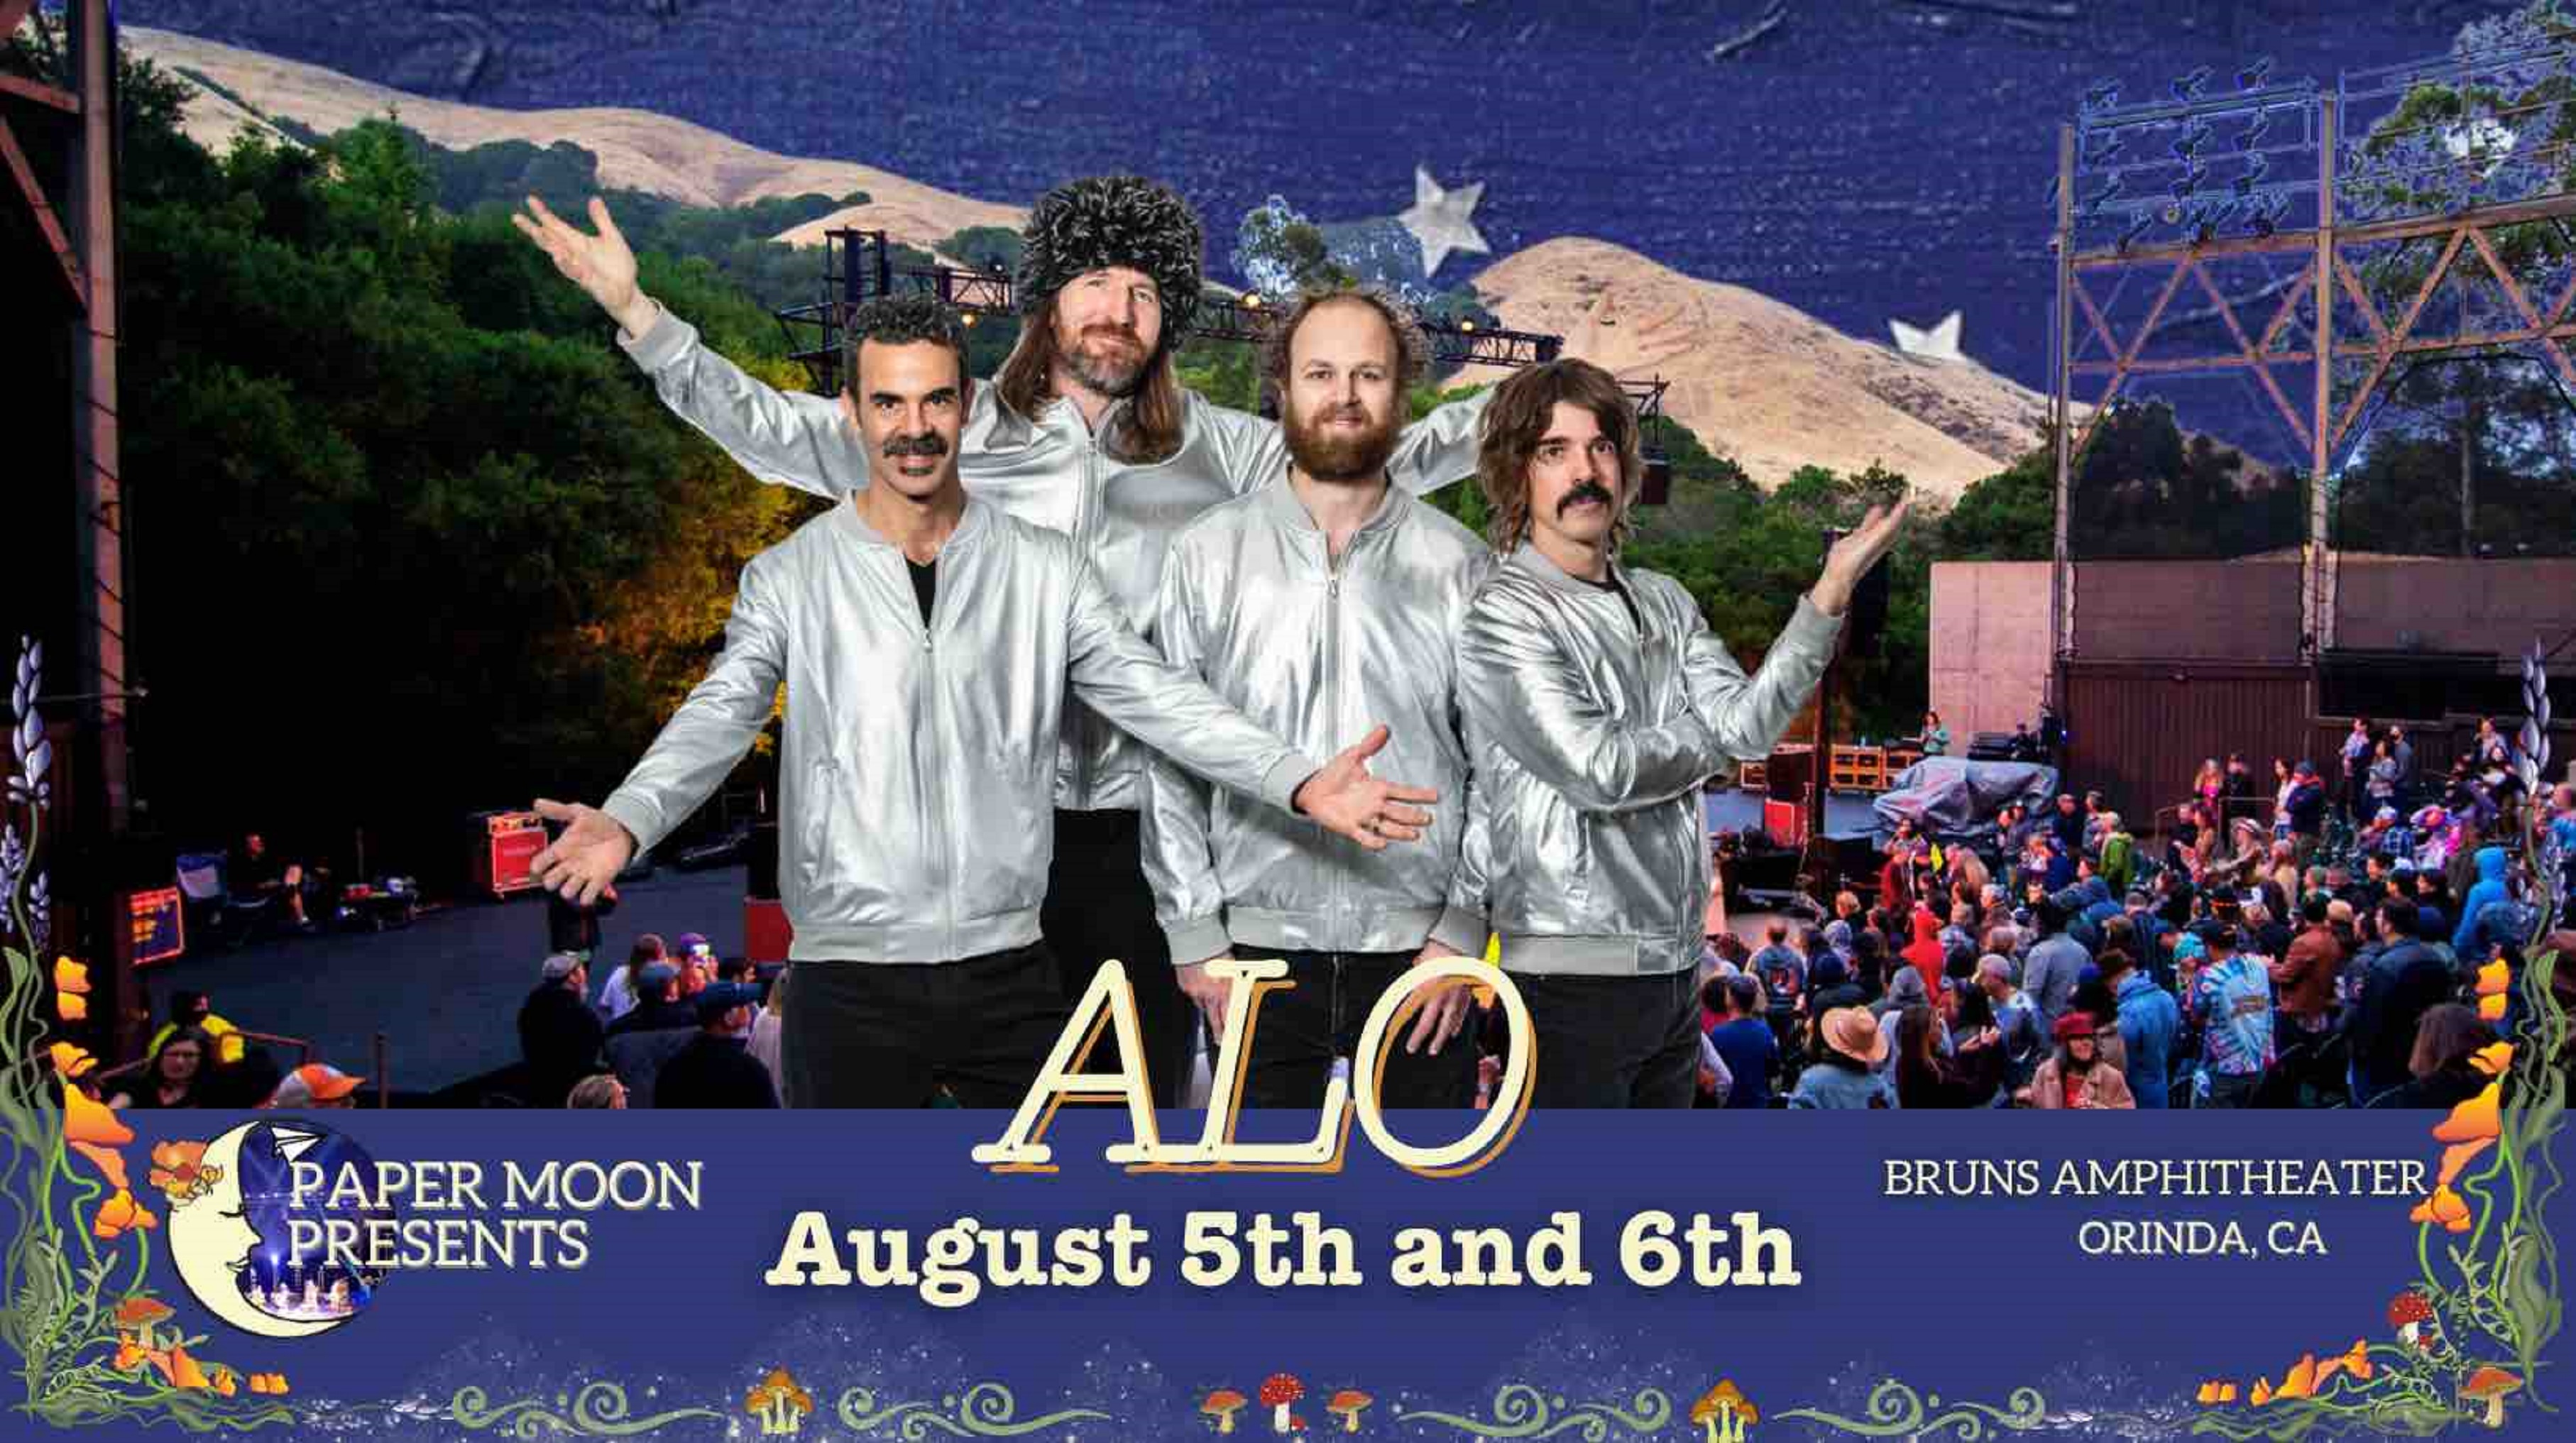 ALO Returns to the Bruns Amphitheater to Headline Two-Day Festival Along with the Debut Performance of Jay Lane & The Mayhem